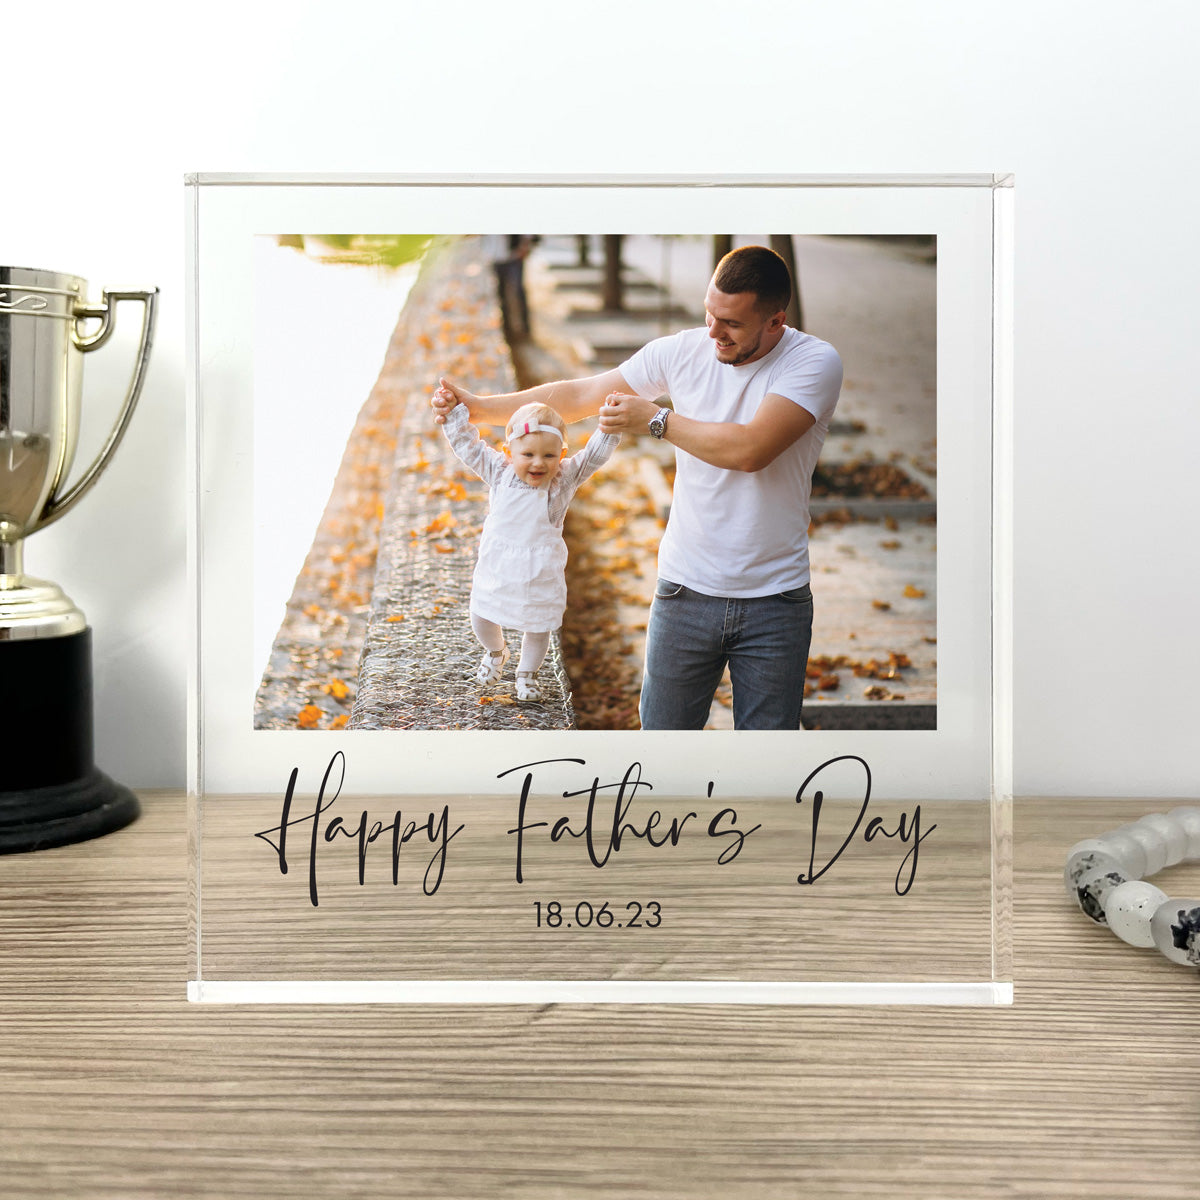 Personalised Father's Day Photo Freestanding Acrylic Block